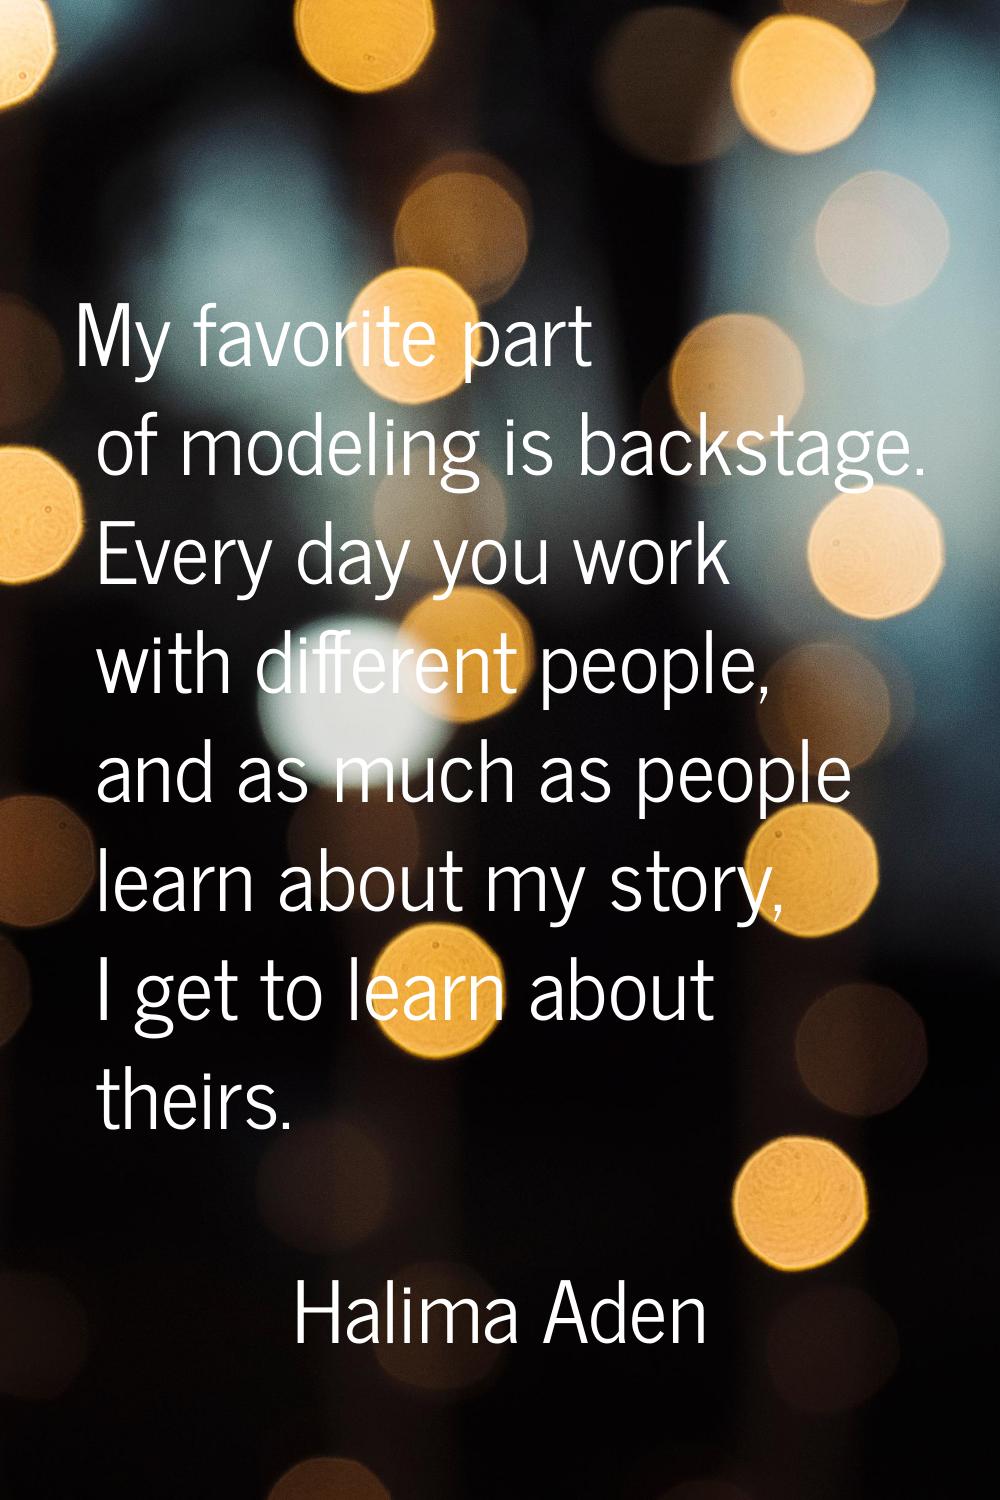 My favorite part of modeling is backstage. Every day you work with different people, and as much as